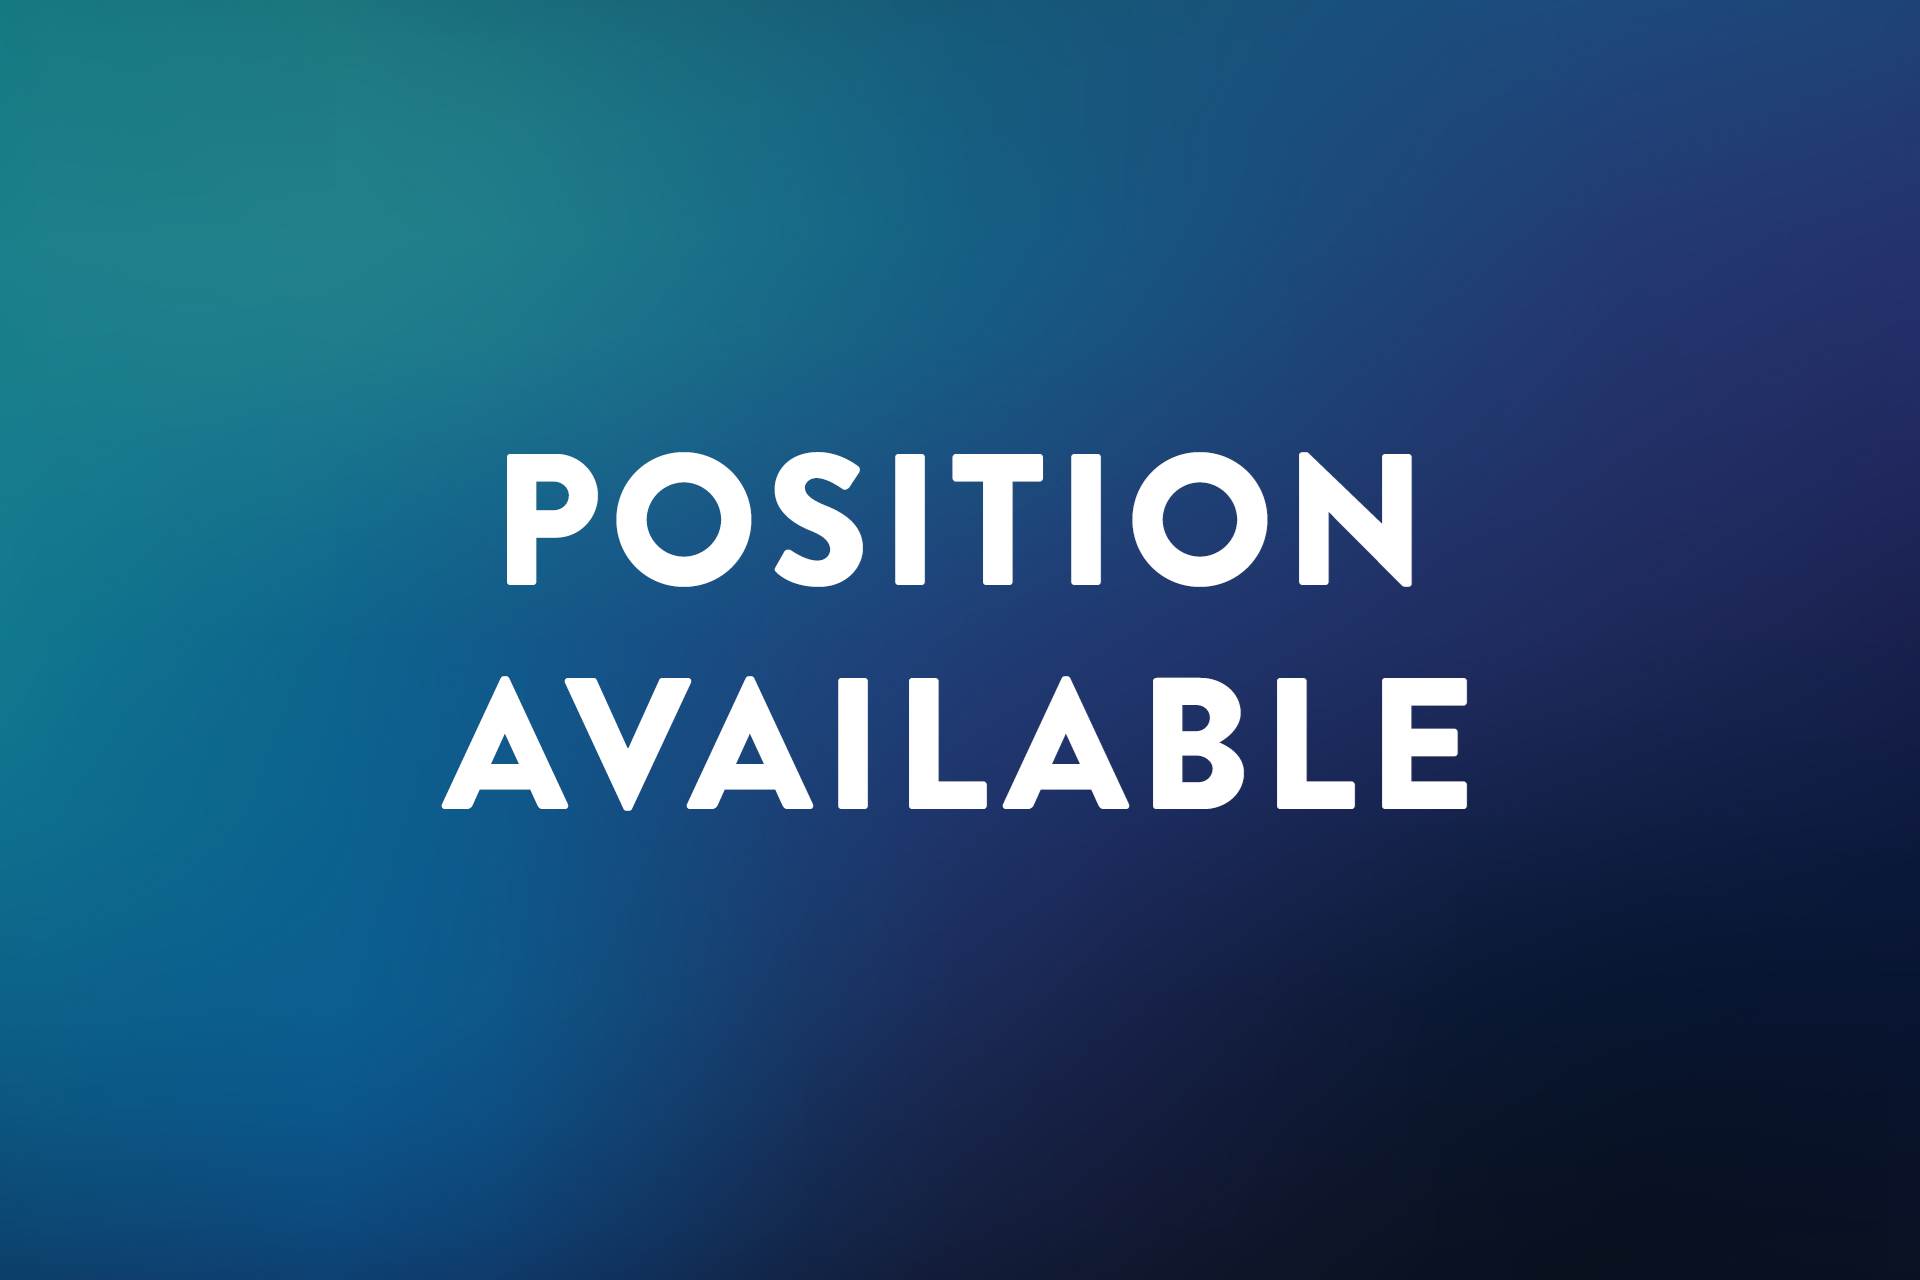 Link to Position Available detail page